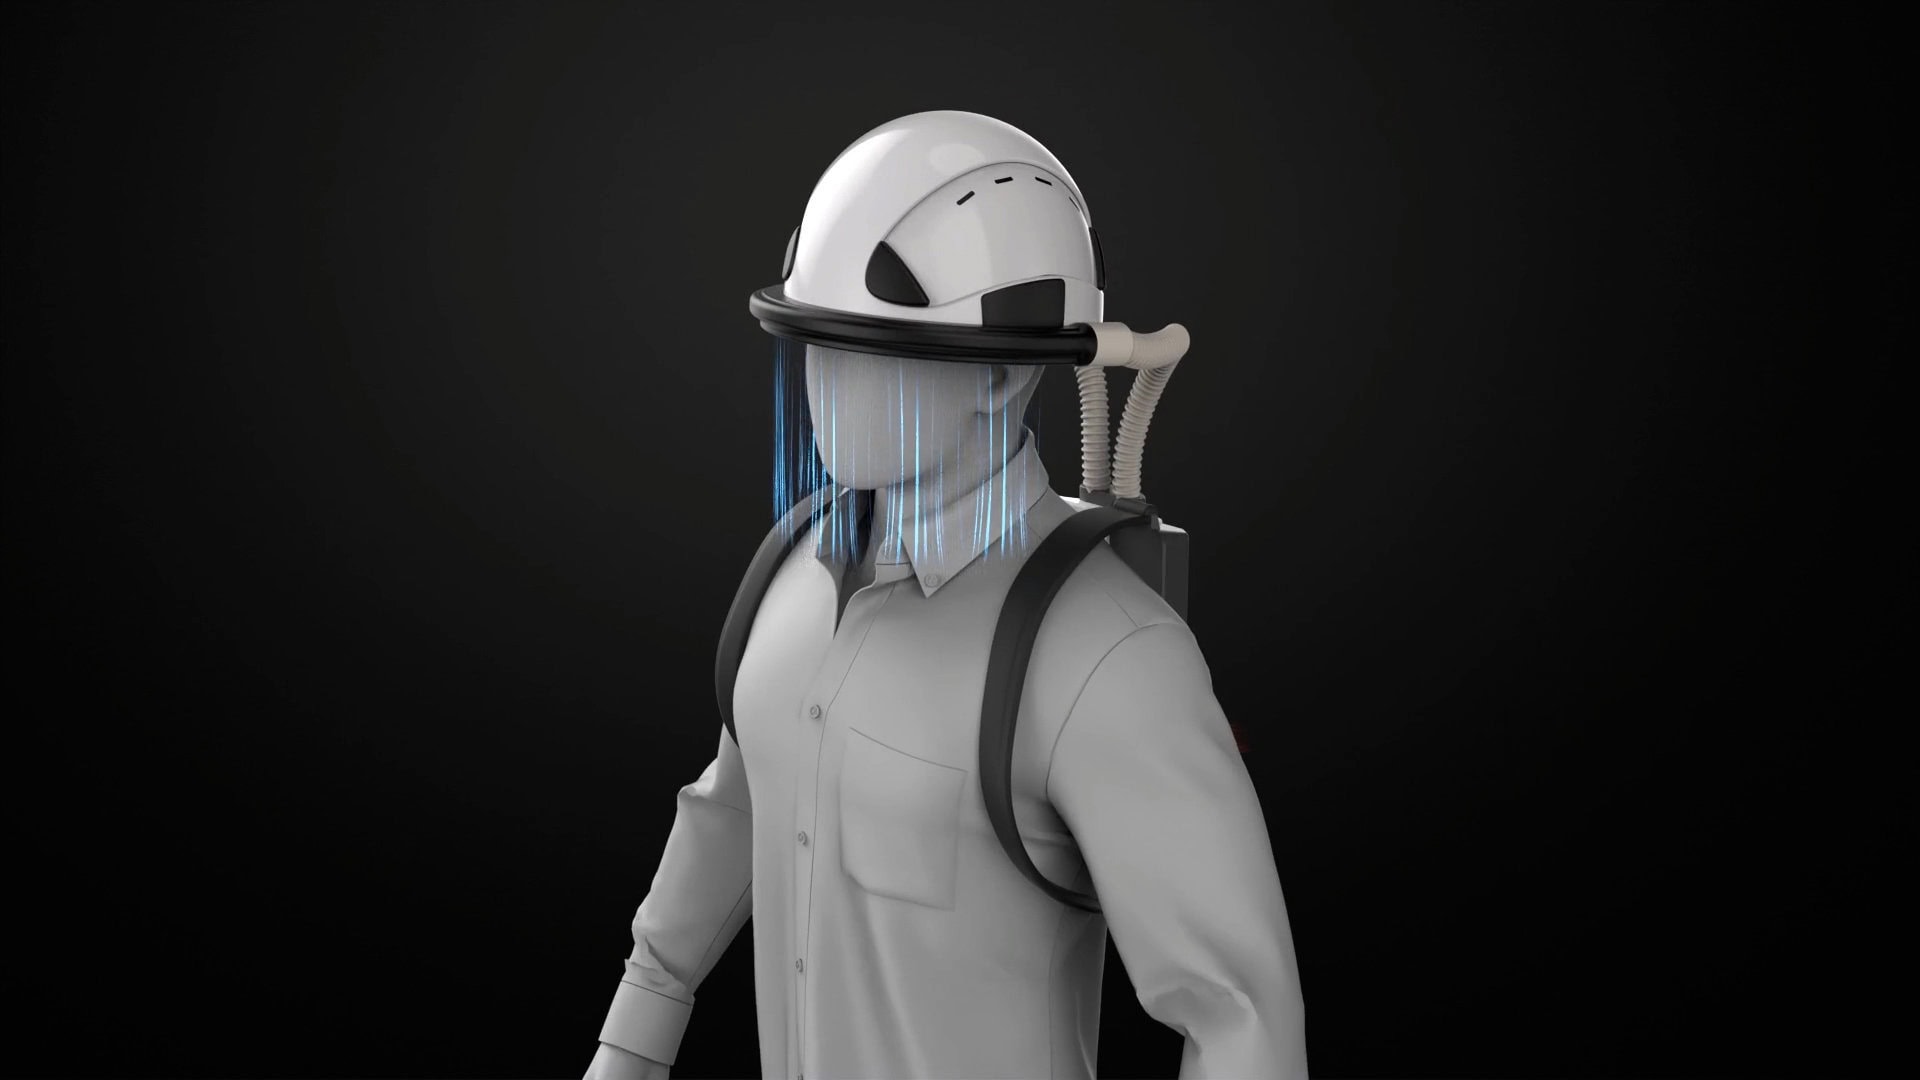 An animation screenshot shows a simulated worker wearing a hardhat connected by two air tubes to a backpack that houses the device’s cold plasma module. Air is shown flowing downward from the brim of the hat.